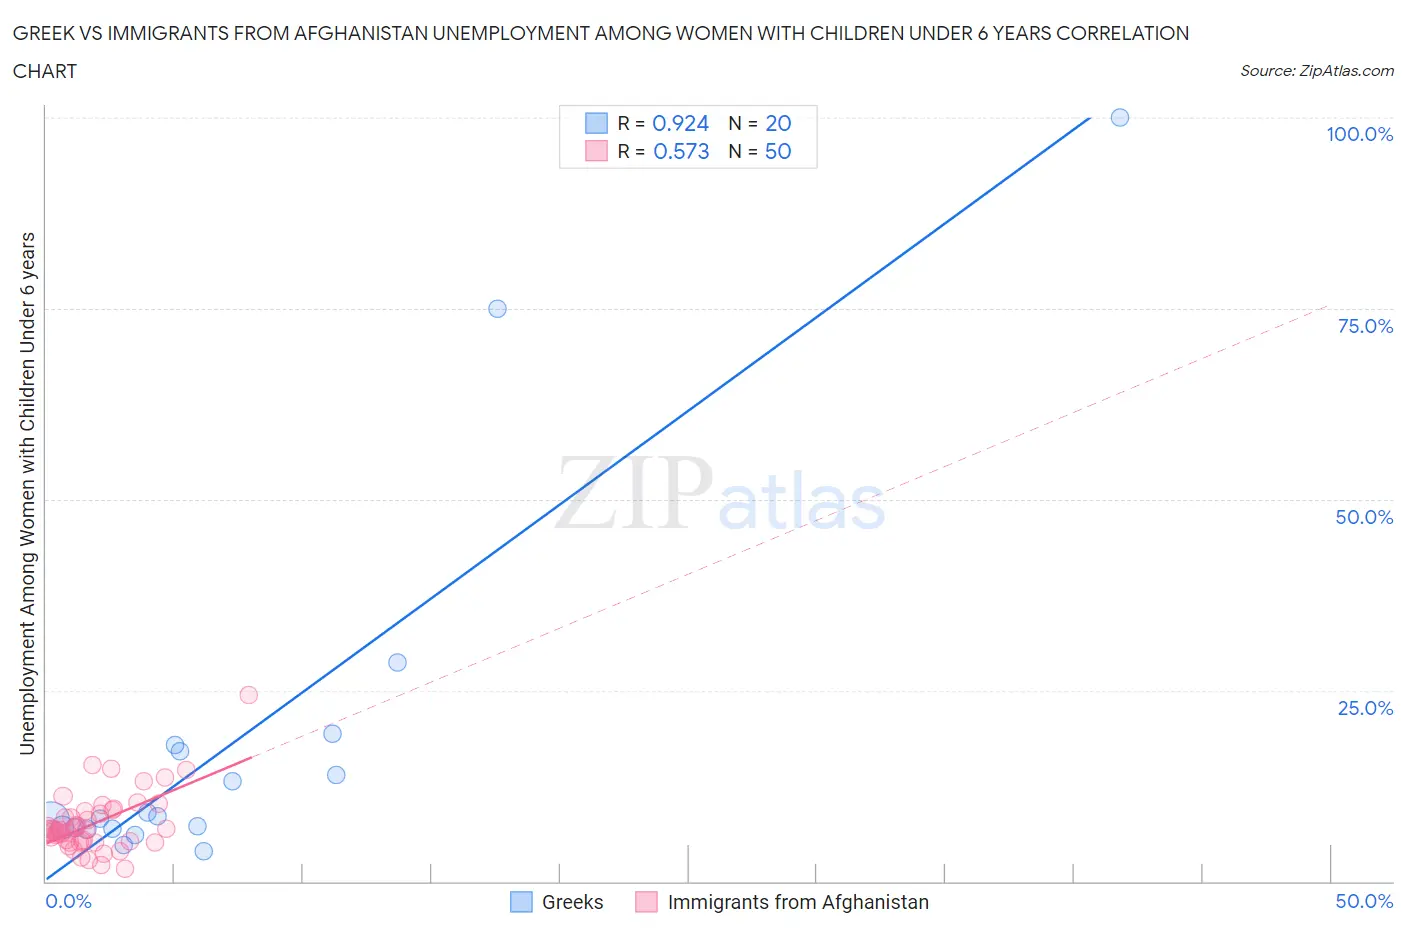 Greek vs Immigrants from Afghanistan Unemployment Among Women with Children Under 6 years